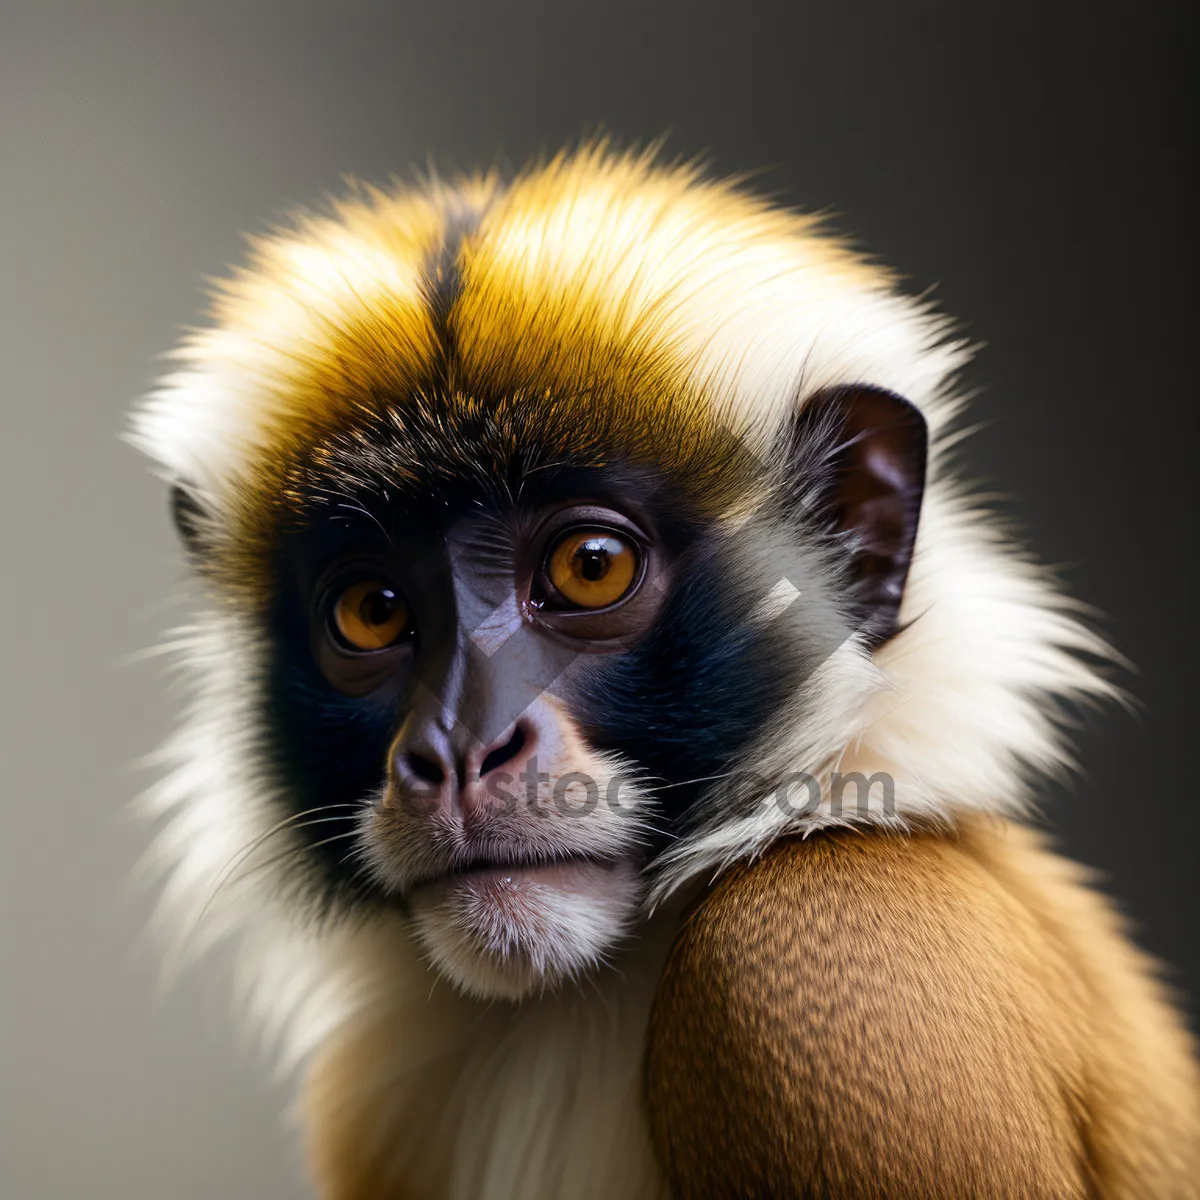 Picture of Cute Primate Monkey with Expressive Eyes